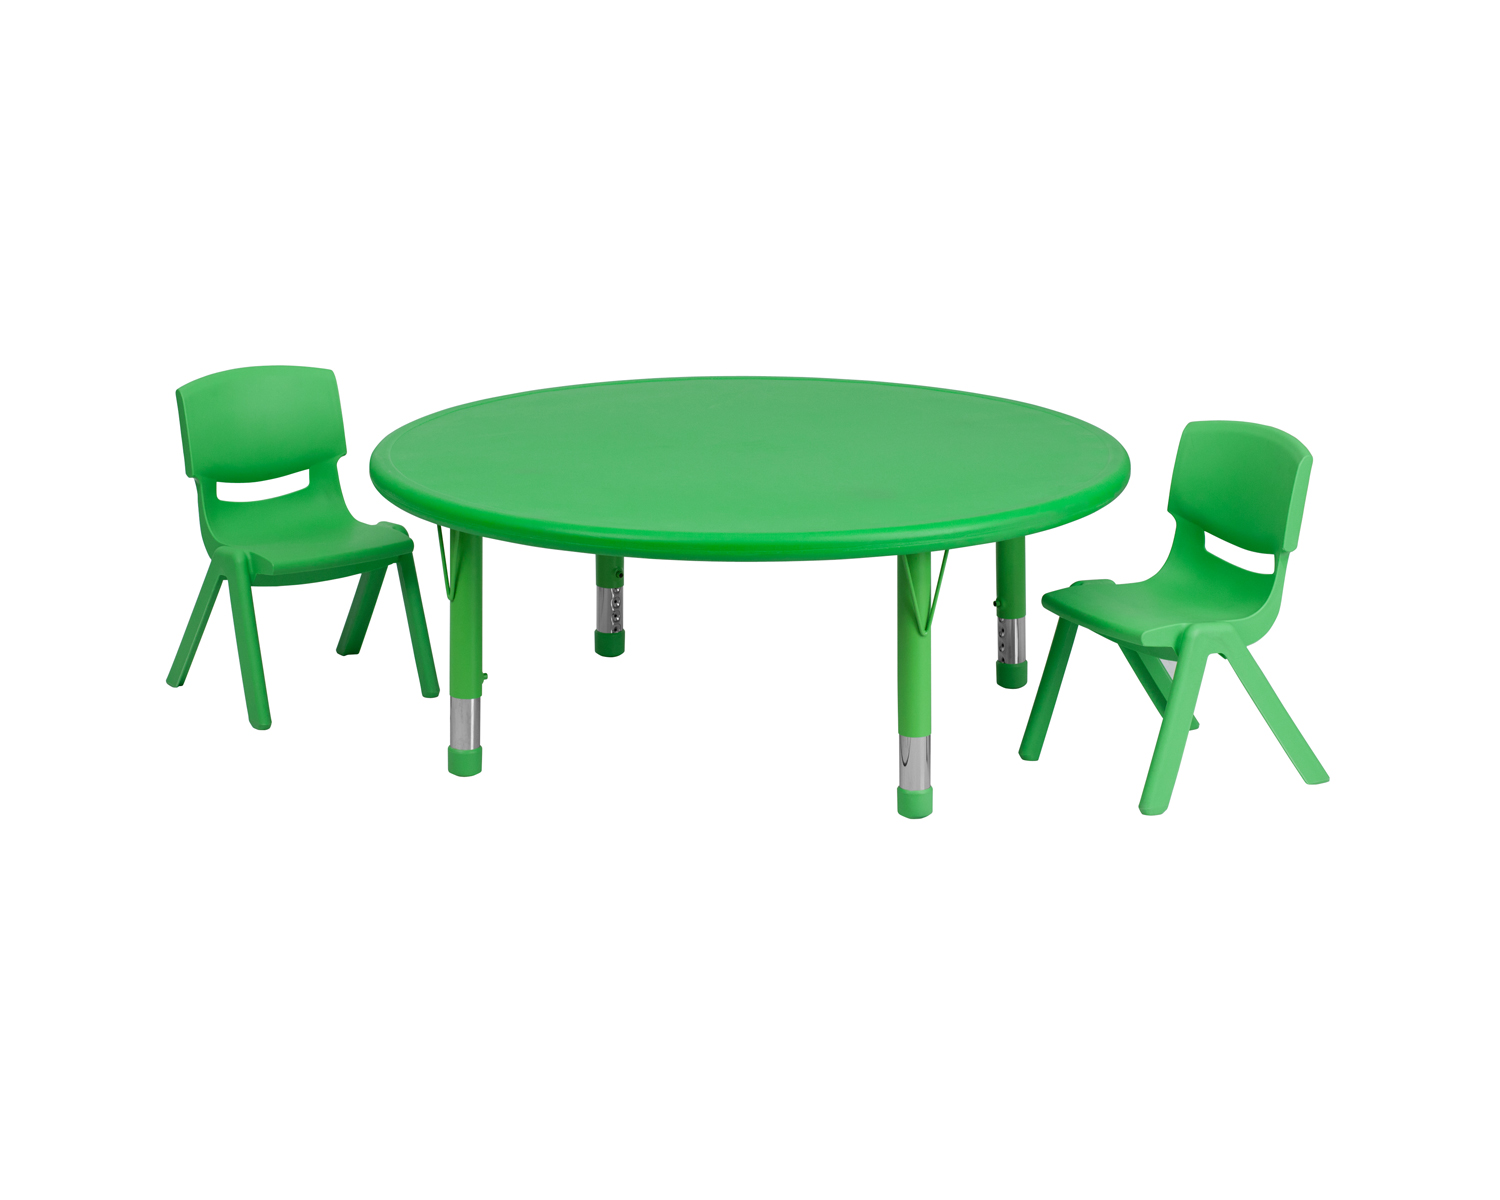 45'' Round Green Plastic Height Adjustable Activity Table Set with 2 Chairs